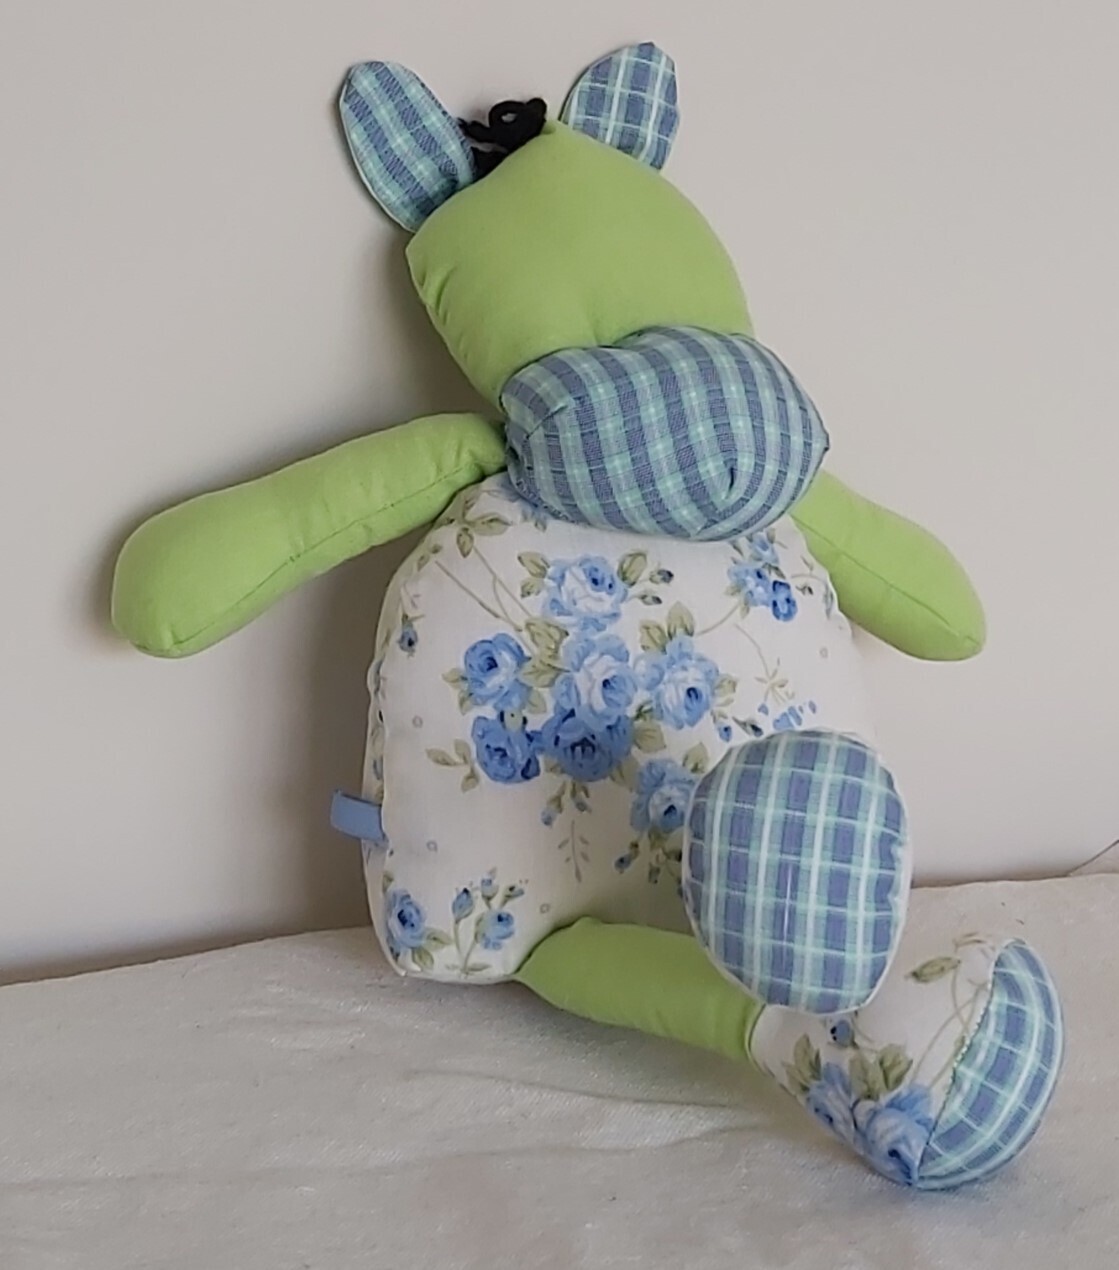 Mama Moo in Lime green and blue flowers